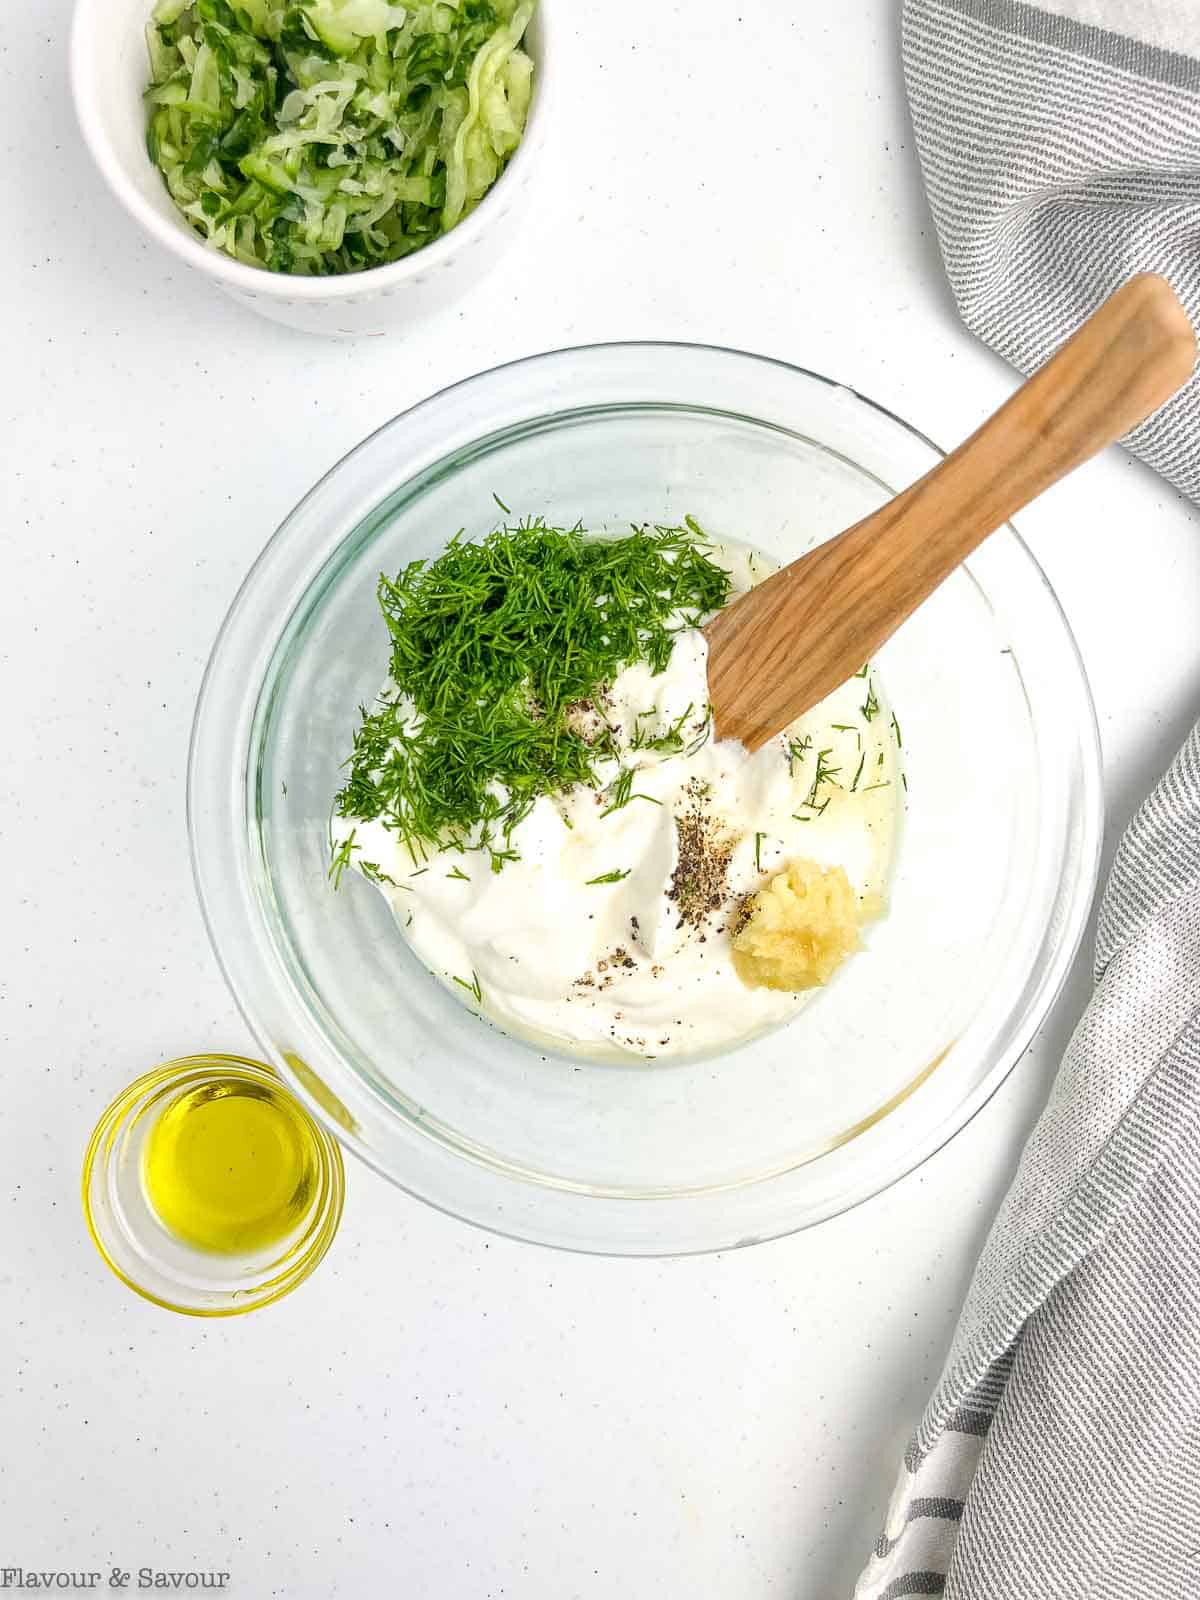 Combining ingredients for tzatziki sauce in a glass bowl.